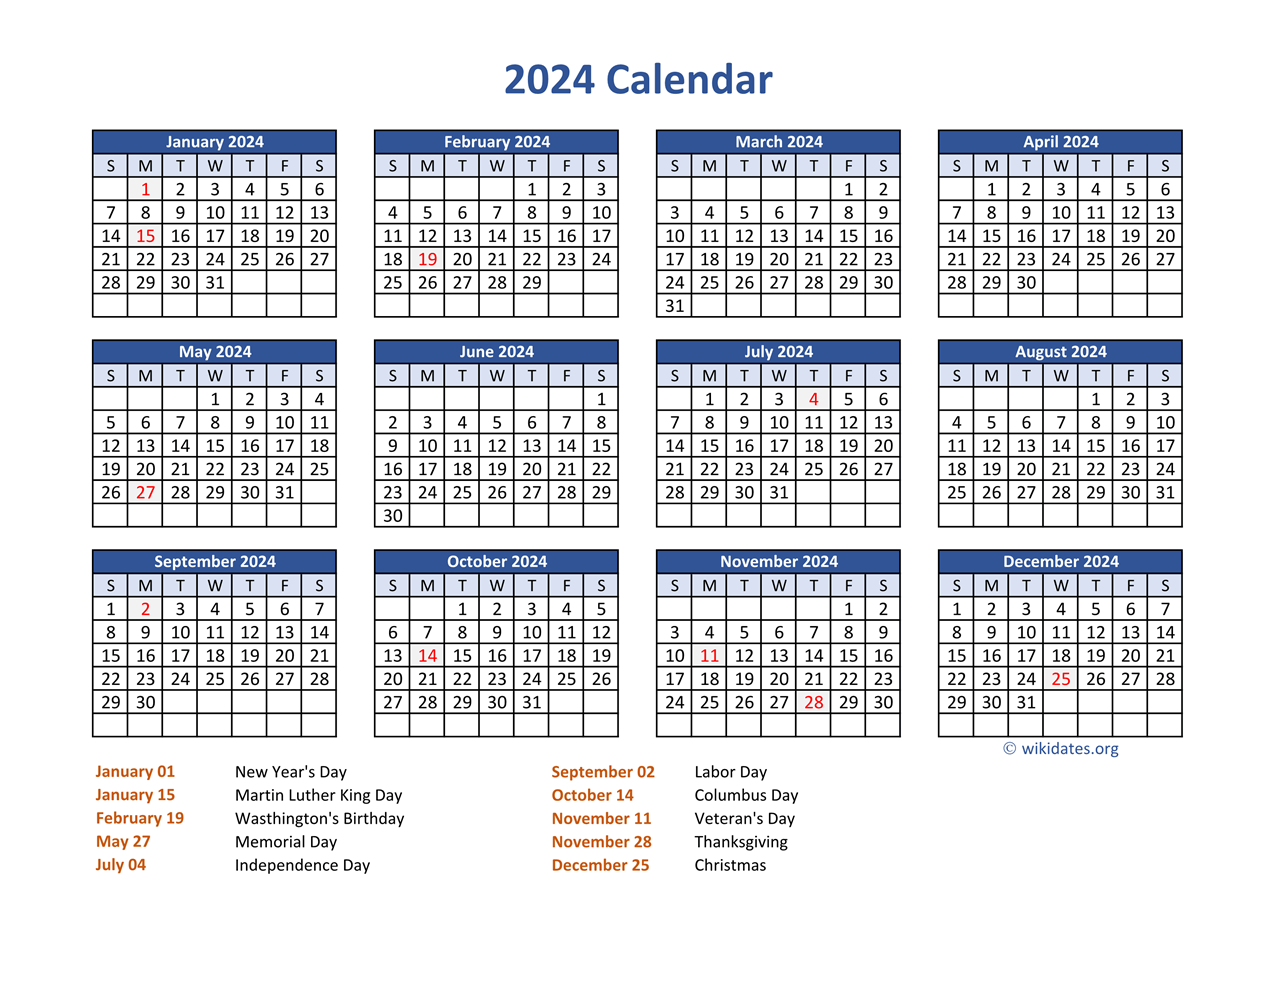 Pdf Calendar 2024 With Federal Holidays | Wikidates for Printable Calendar With Holidays 2024